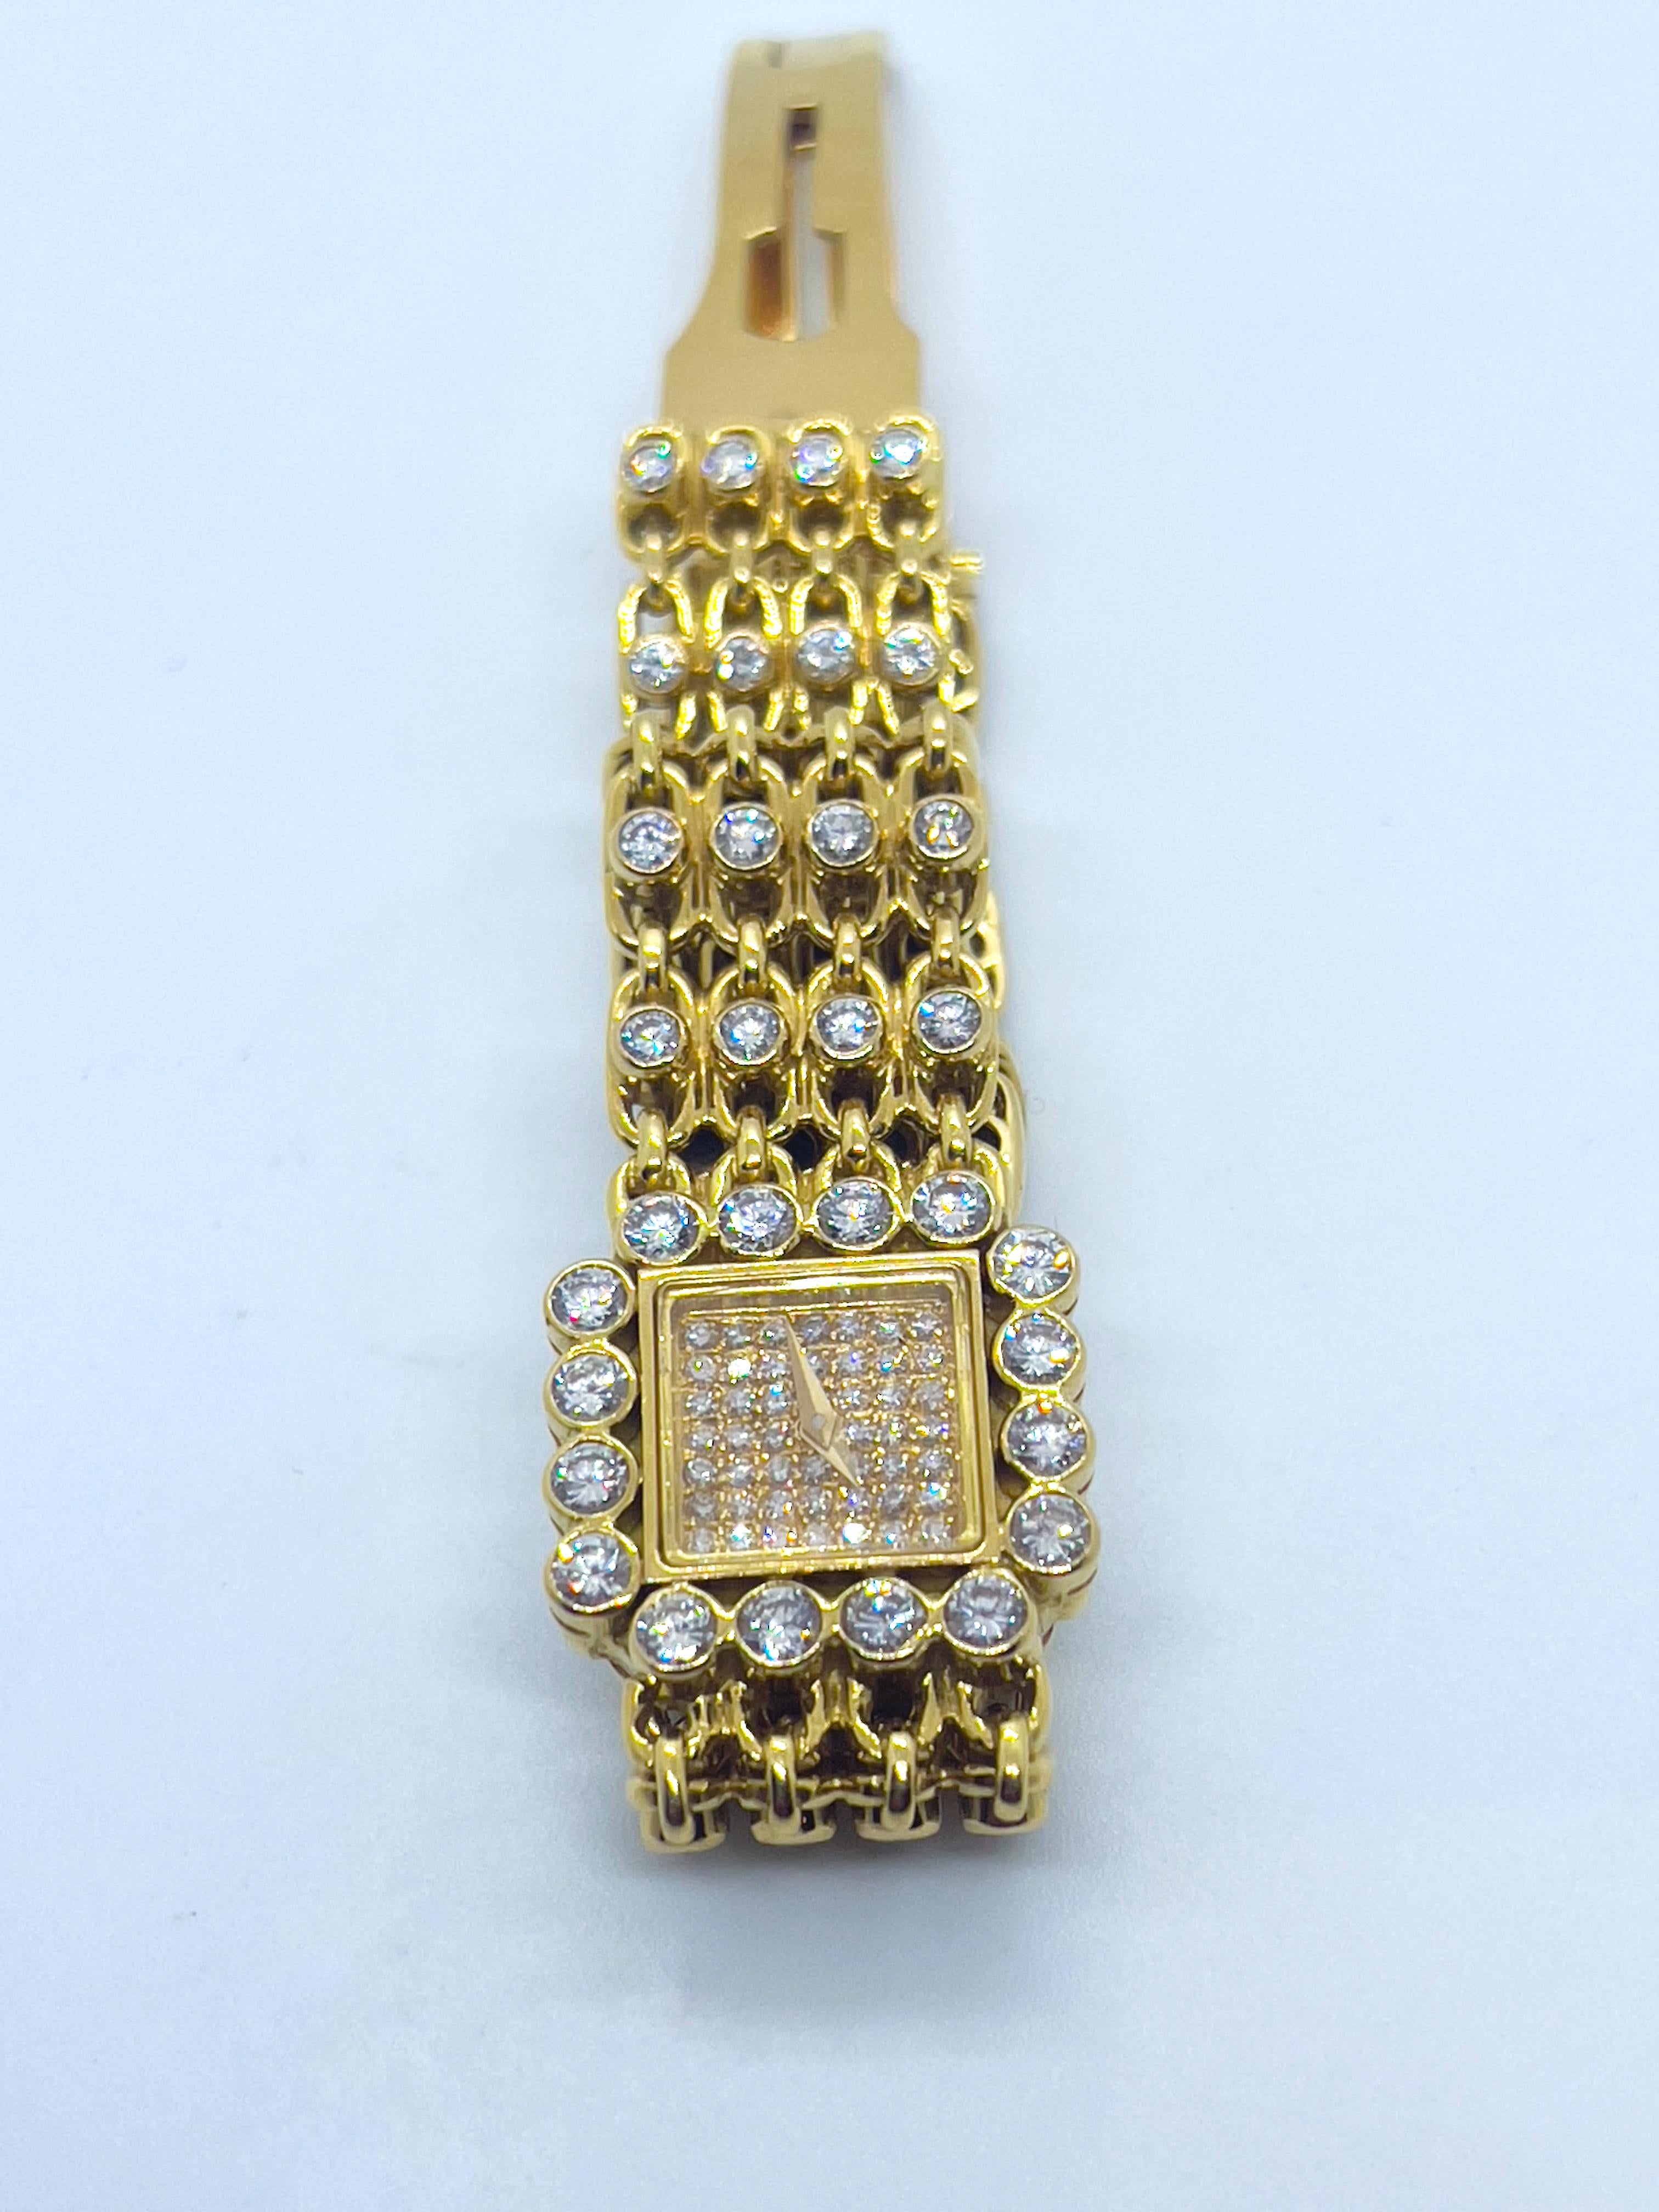 A beautiful Jahan Geneve diamond ladies watch crafted in 18K yellow gold. The rectangular dial which is fully paved with the round-cut diamonds also is surrounded by 16 diamonds 0.1 carat each one. The golden wrist bracelet is decorated with 88